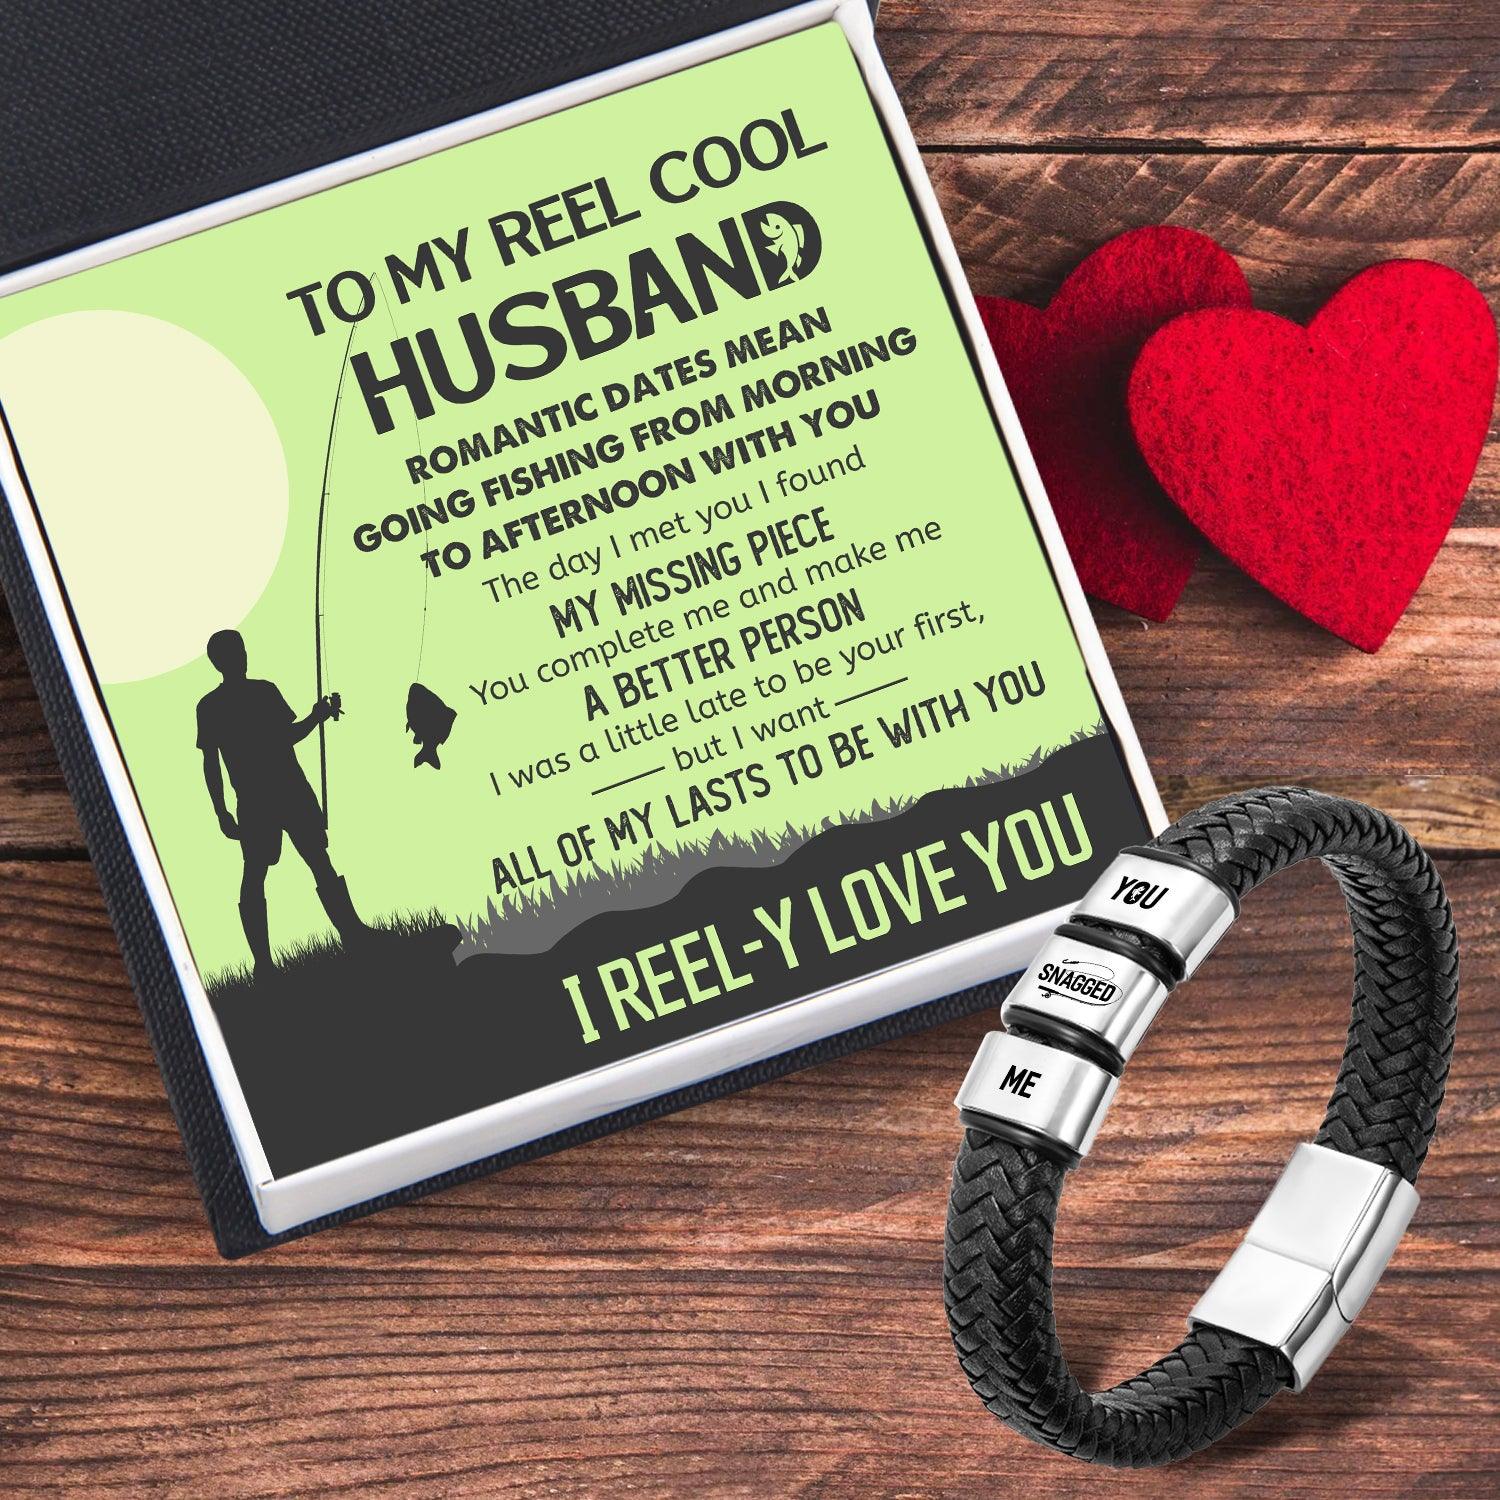 Leather Bracelet - Fishing - To My Husband - I Reel-y Love You - Augbzl14018 - Gifts Holder